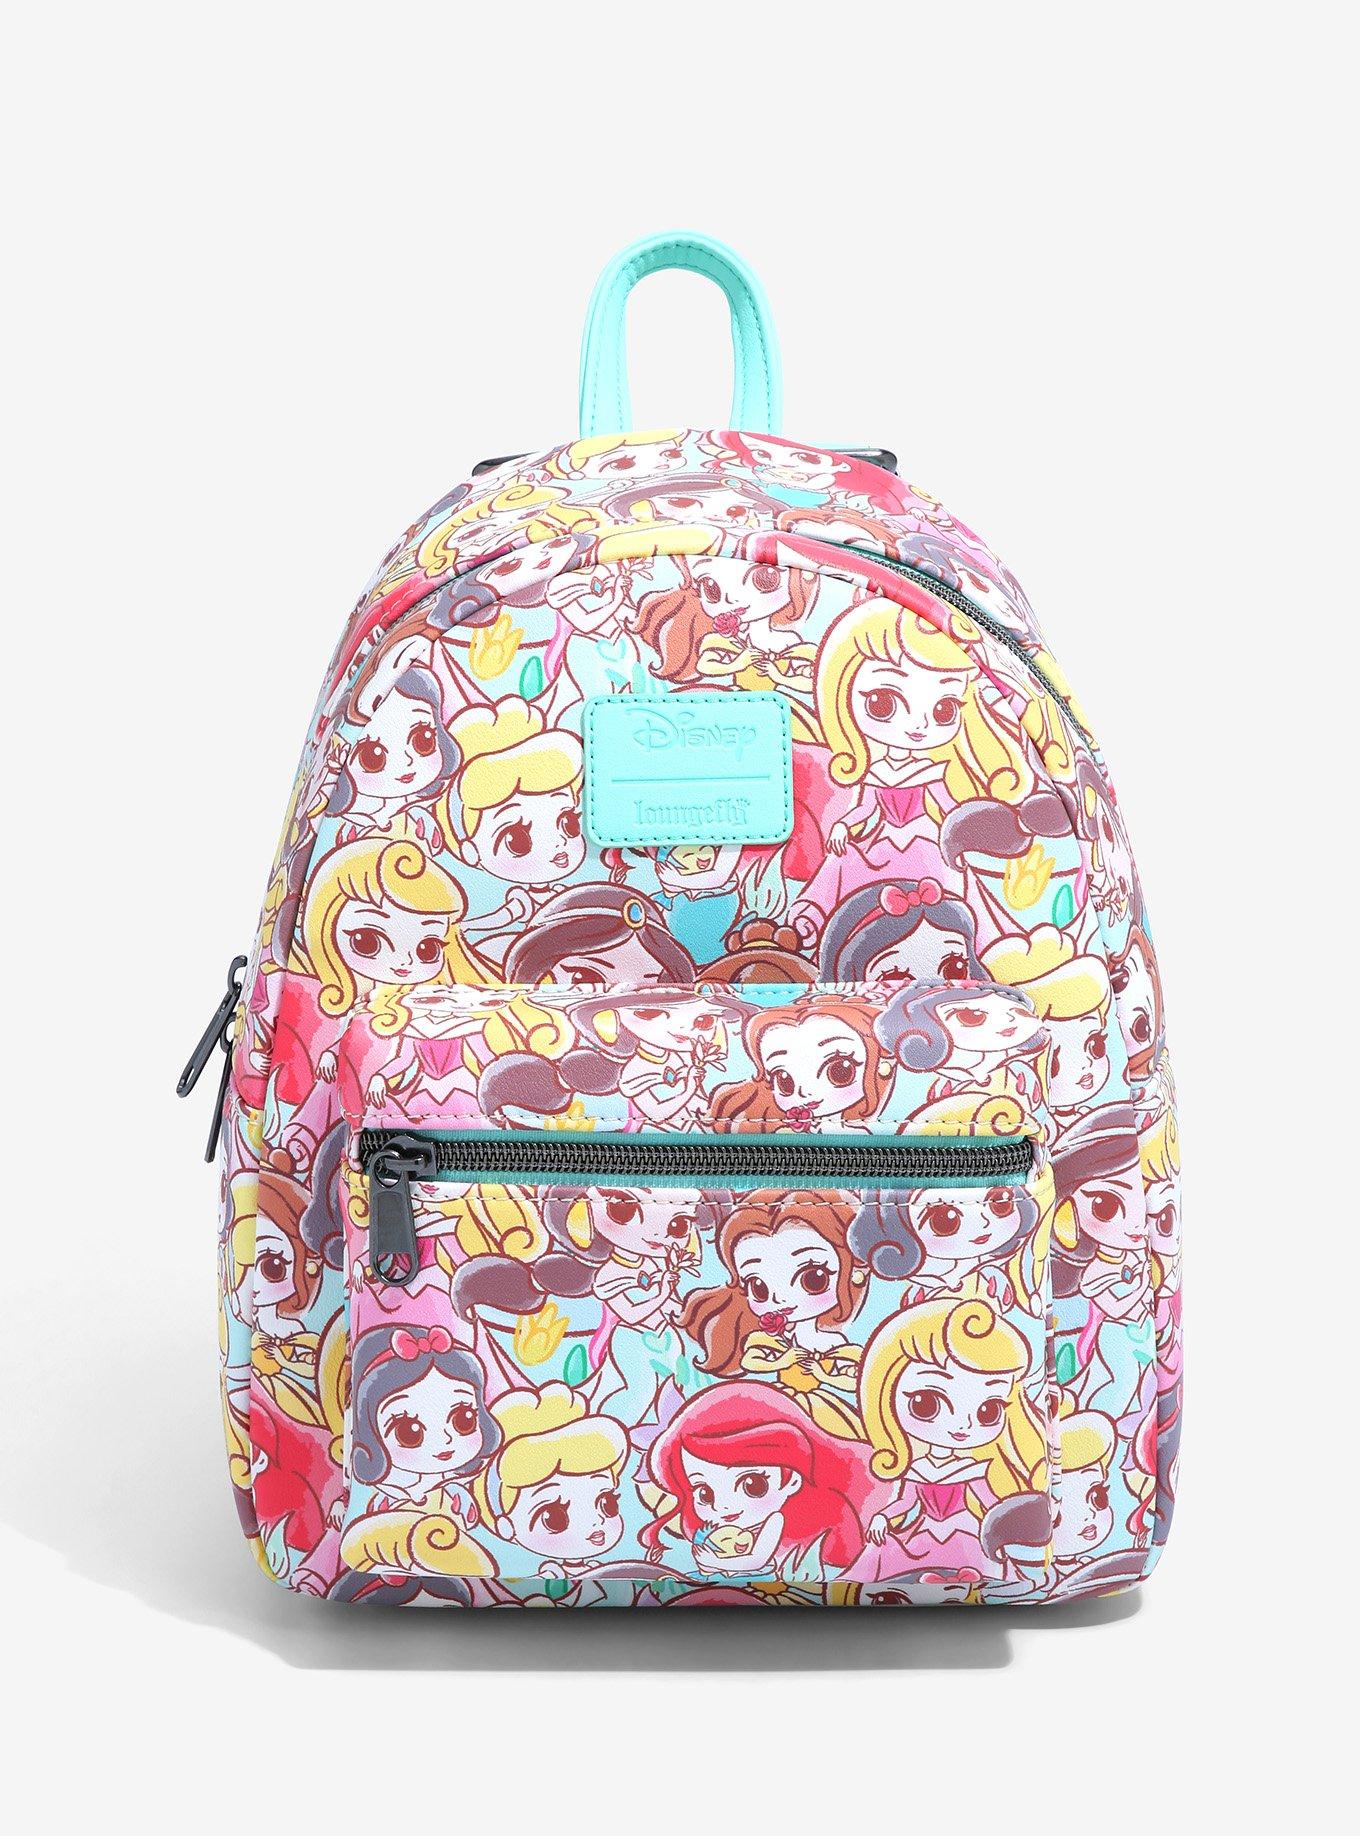 NWT Loungefly Disney Princess Parade Mini  Backpack~Exclusive~Tiana~Ariel~Belle B